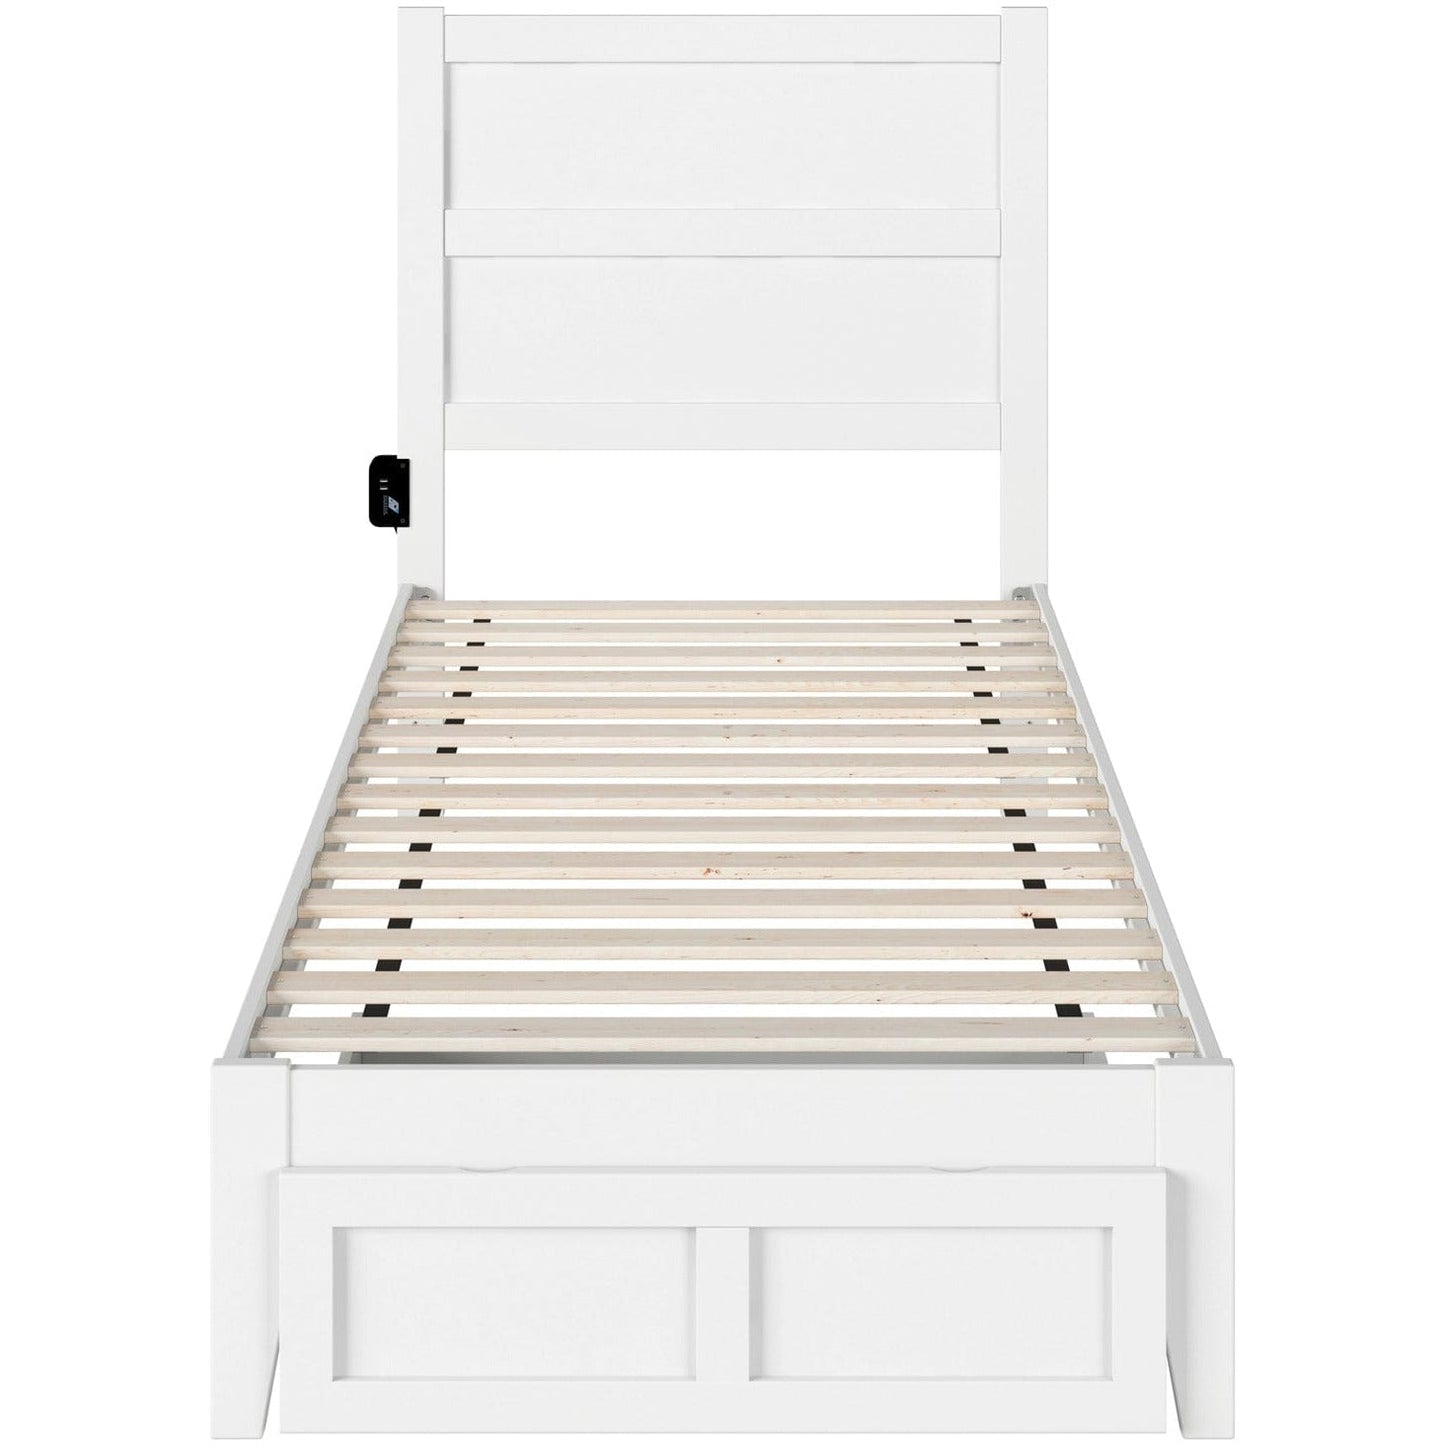 AFI Furnishings NoHo Twin Extra Long Bed with Foot Drawer in White AG9112412